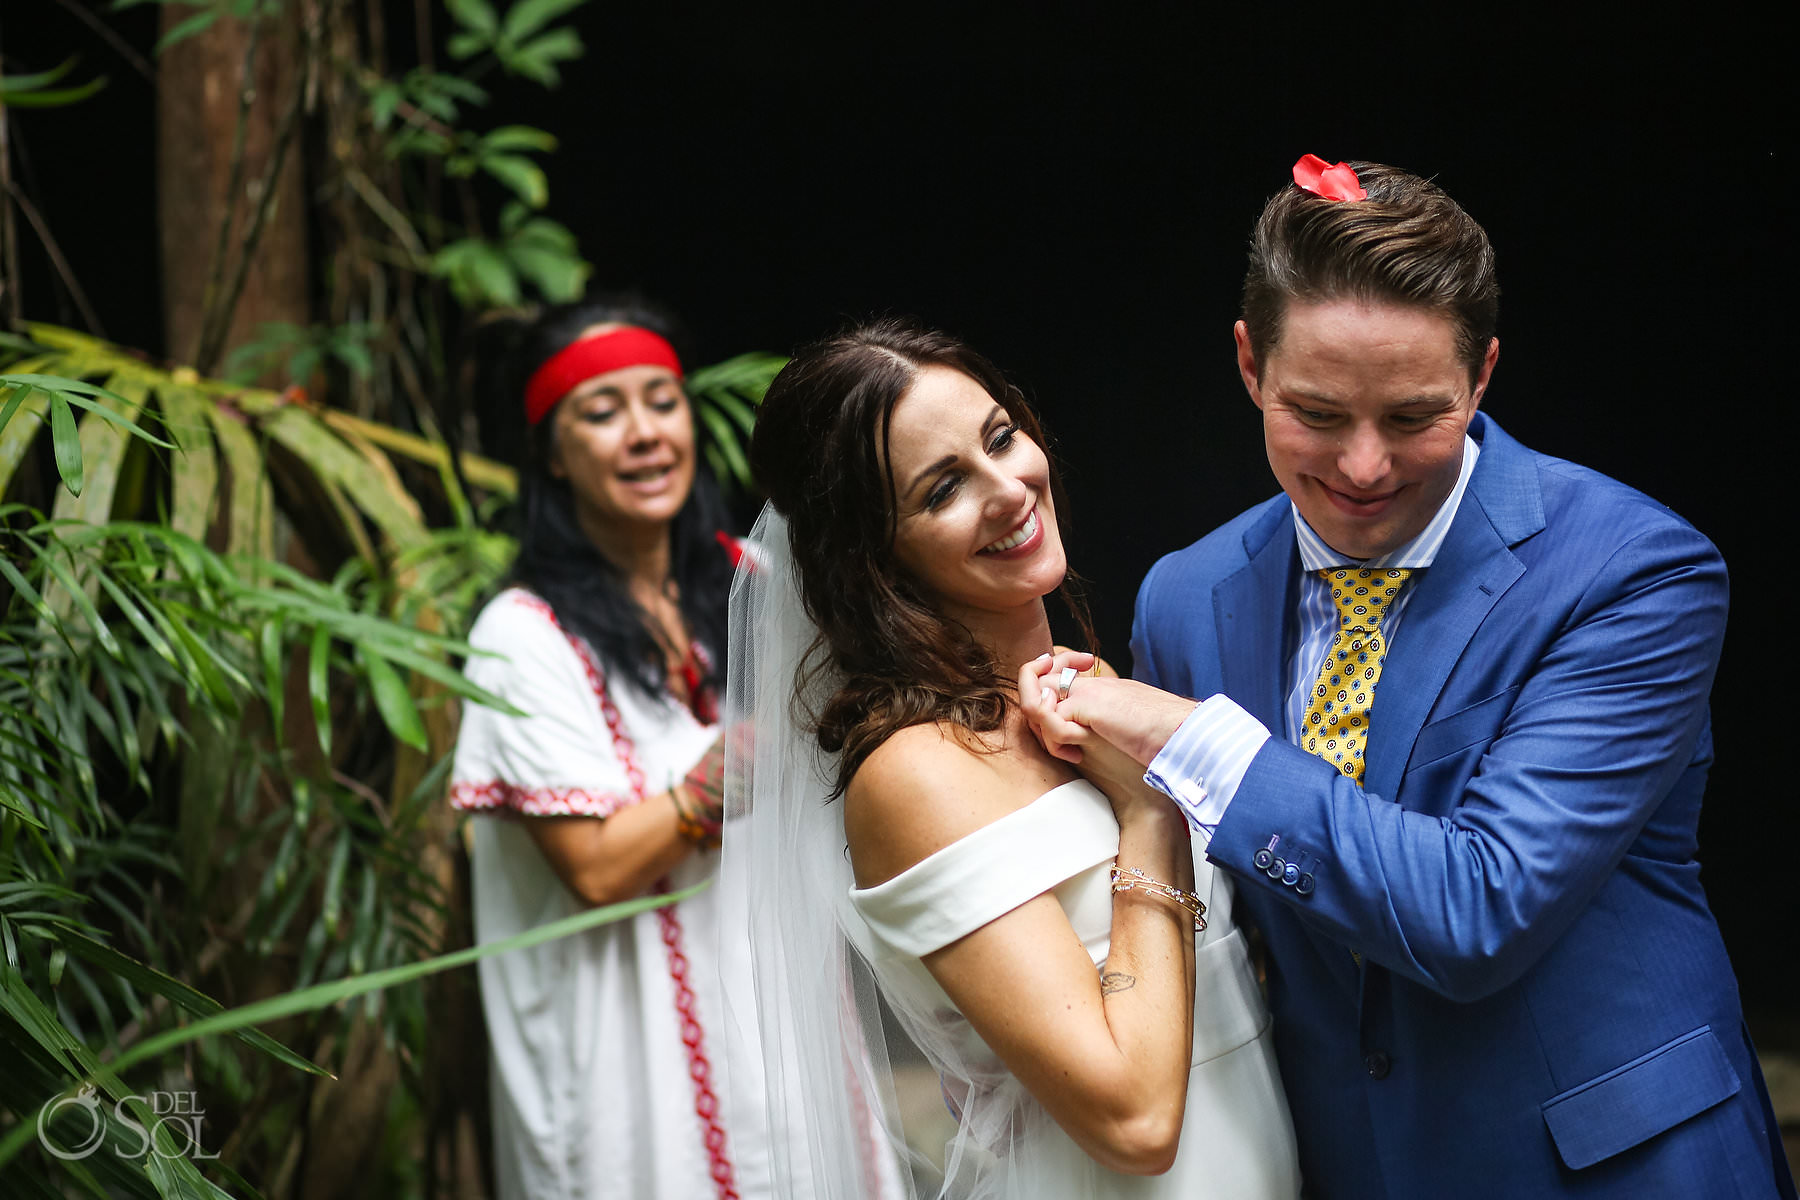 Cute bride and groom moment Eloping in a cenote in Mexico